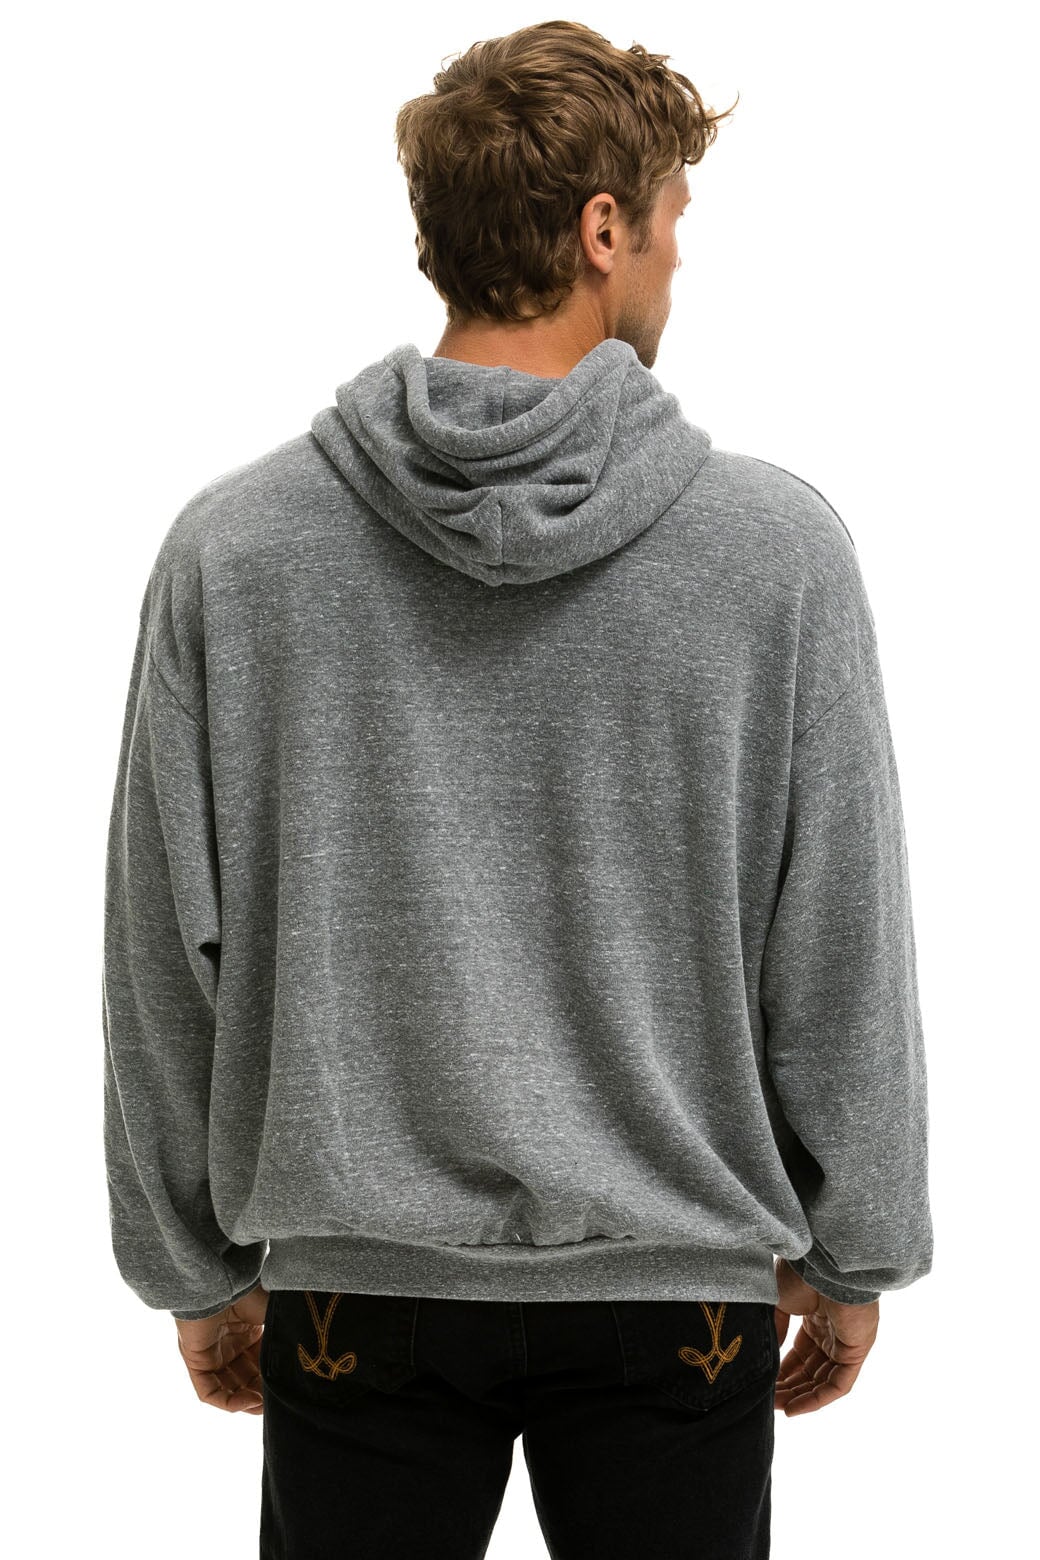 LOGO PULLOVER RELAXED HOODIE - HEATHER GREY - Aviator Nation